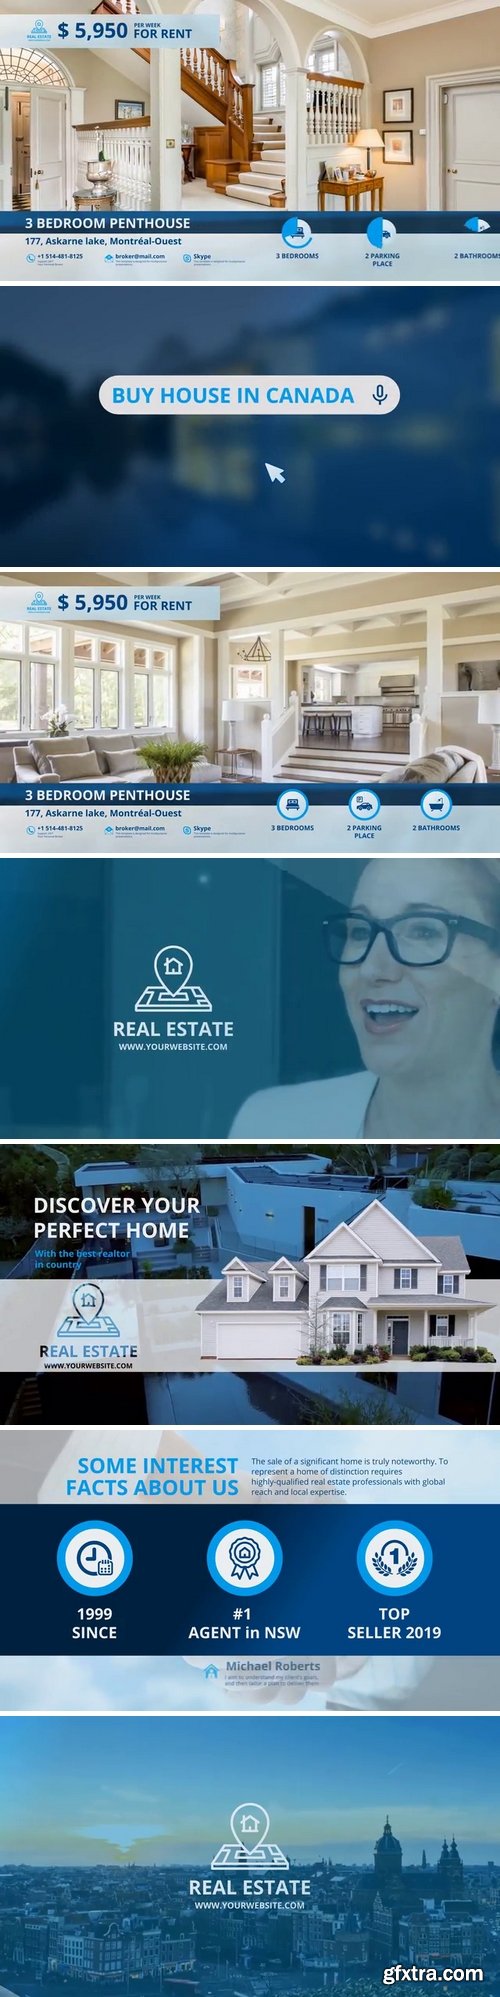 MotionArray - Real Estate Motion After Effects Templates 158090